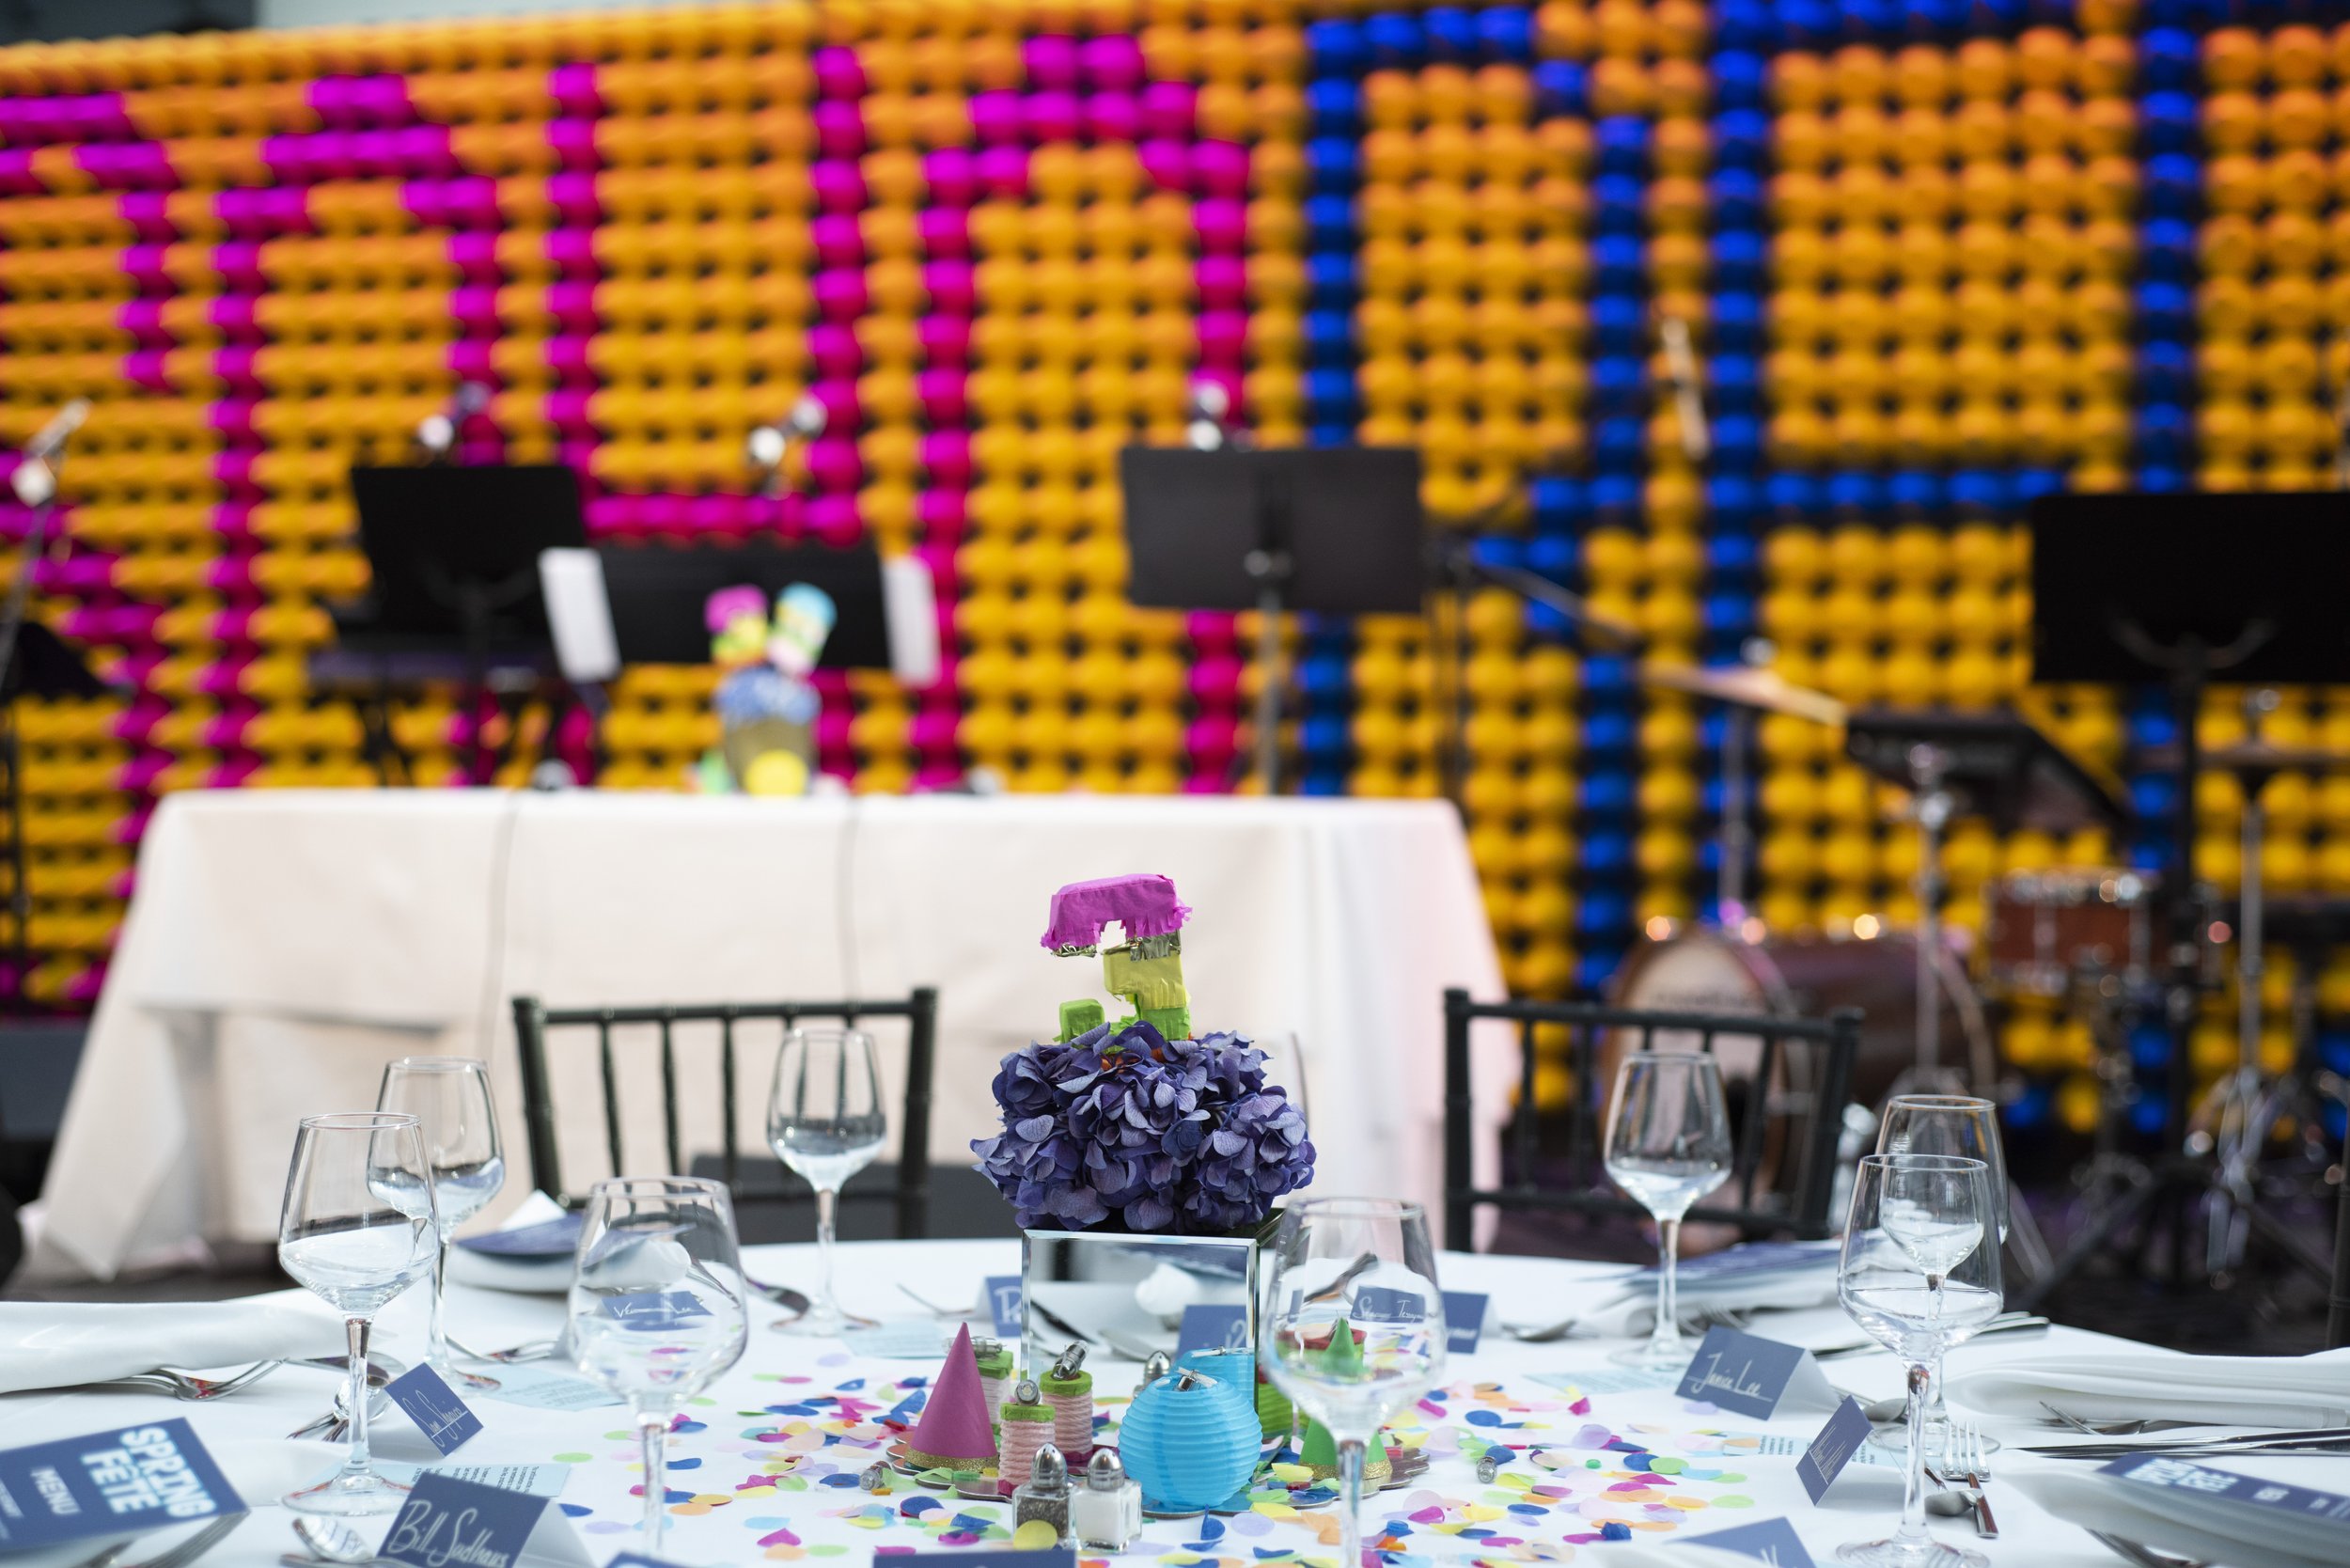  Co-designed with George Hoffmann  Backdrop made of party hats  Florals by Heather Arnson 